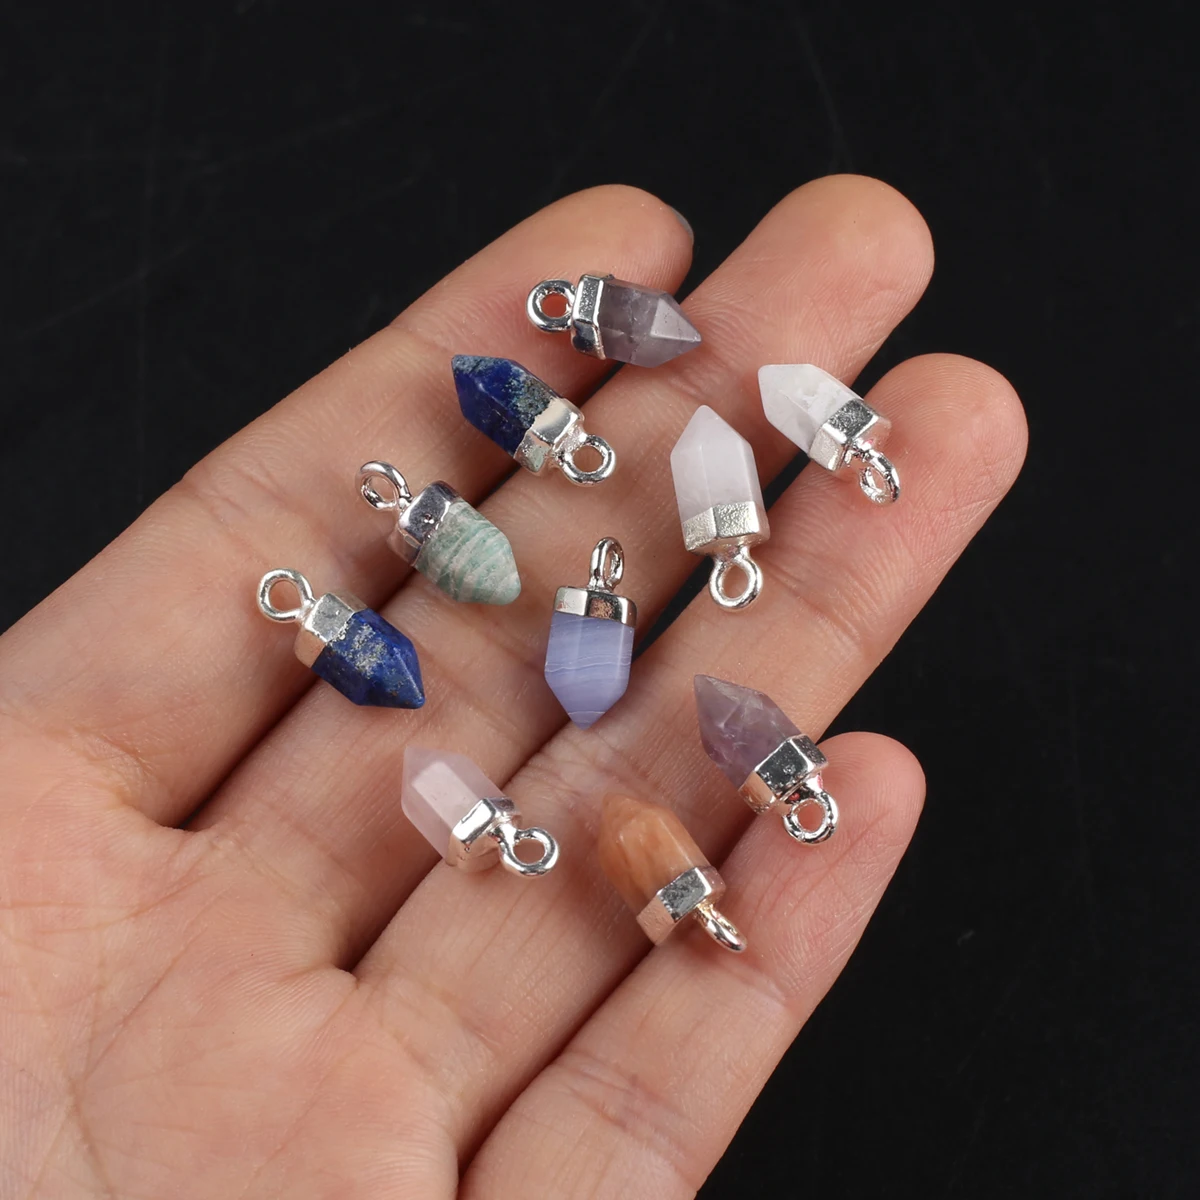 

10 PCS Wholesale Natural Stone Random Color Hexagonal Column Pendant Jewelry Making DIY Necklace Earrings Accessories Gift